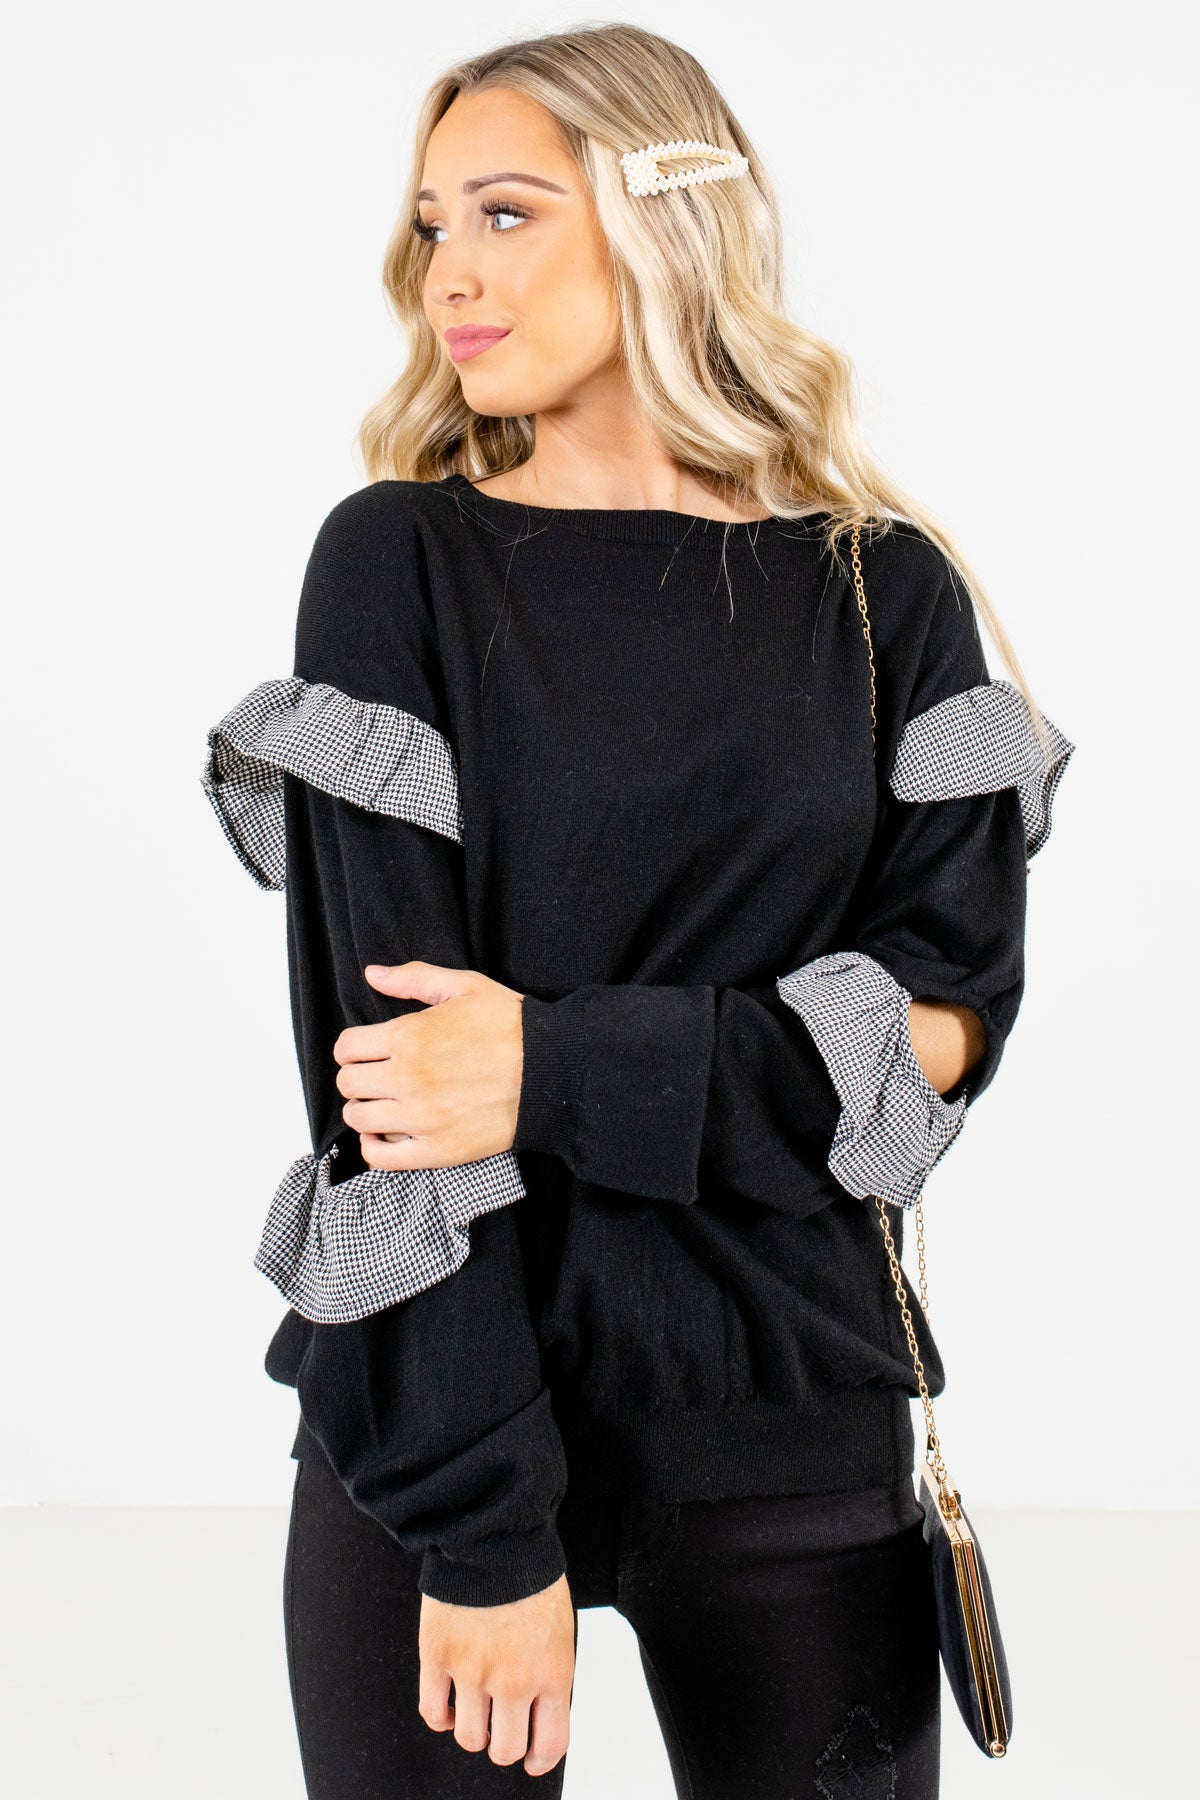 Women's Black High-Quality Knit Material Boutique Tops